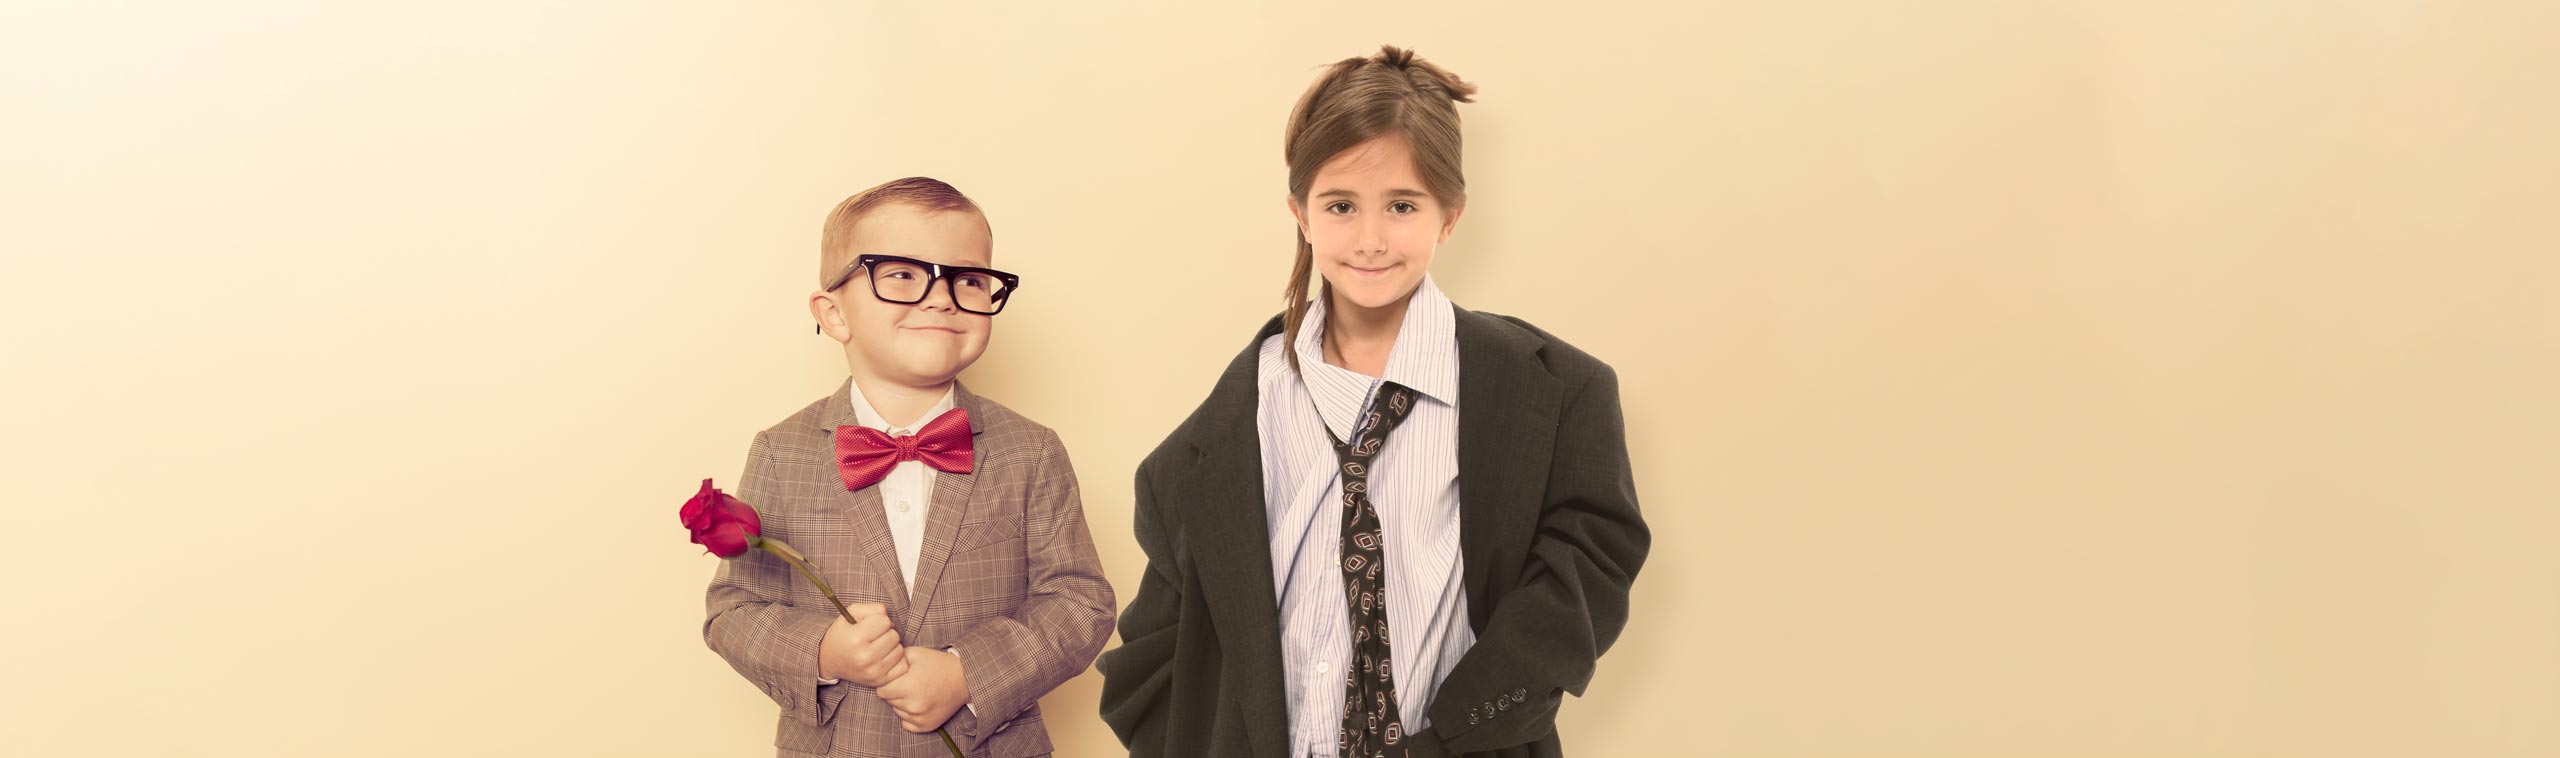 A young boy in a smart suit and a girl in a poorly fitting suit